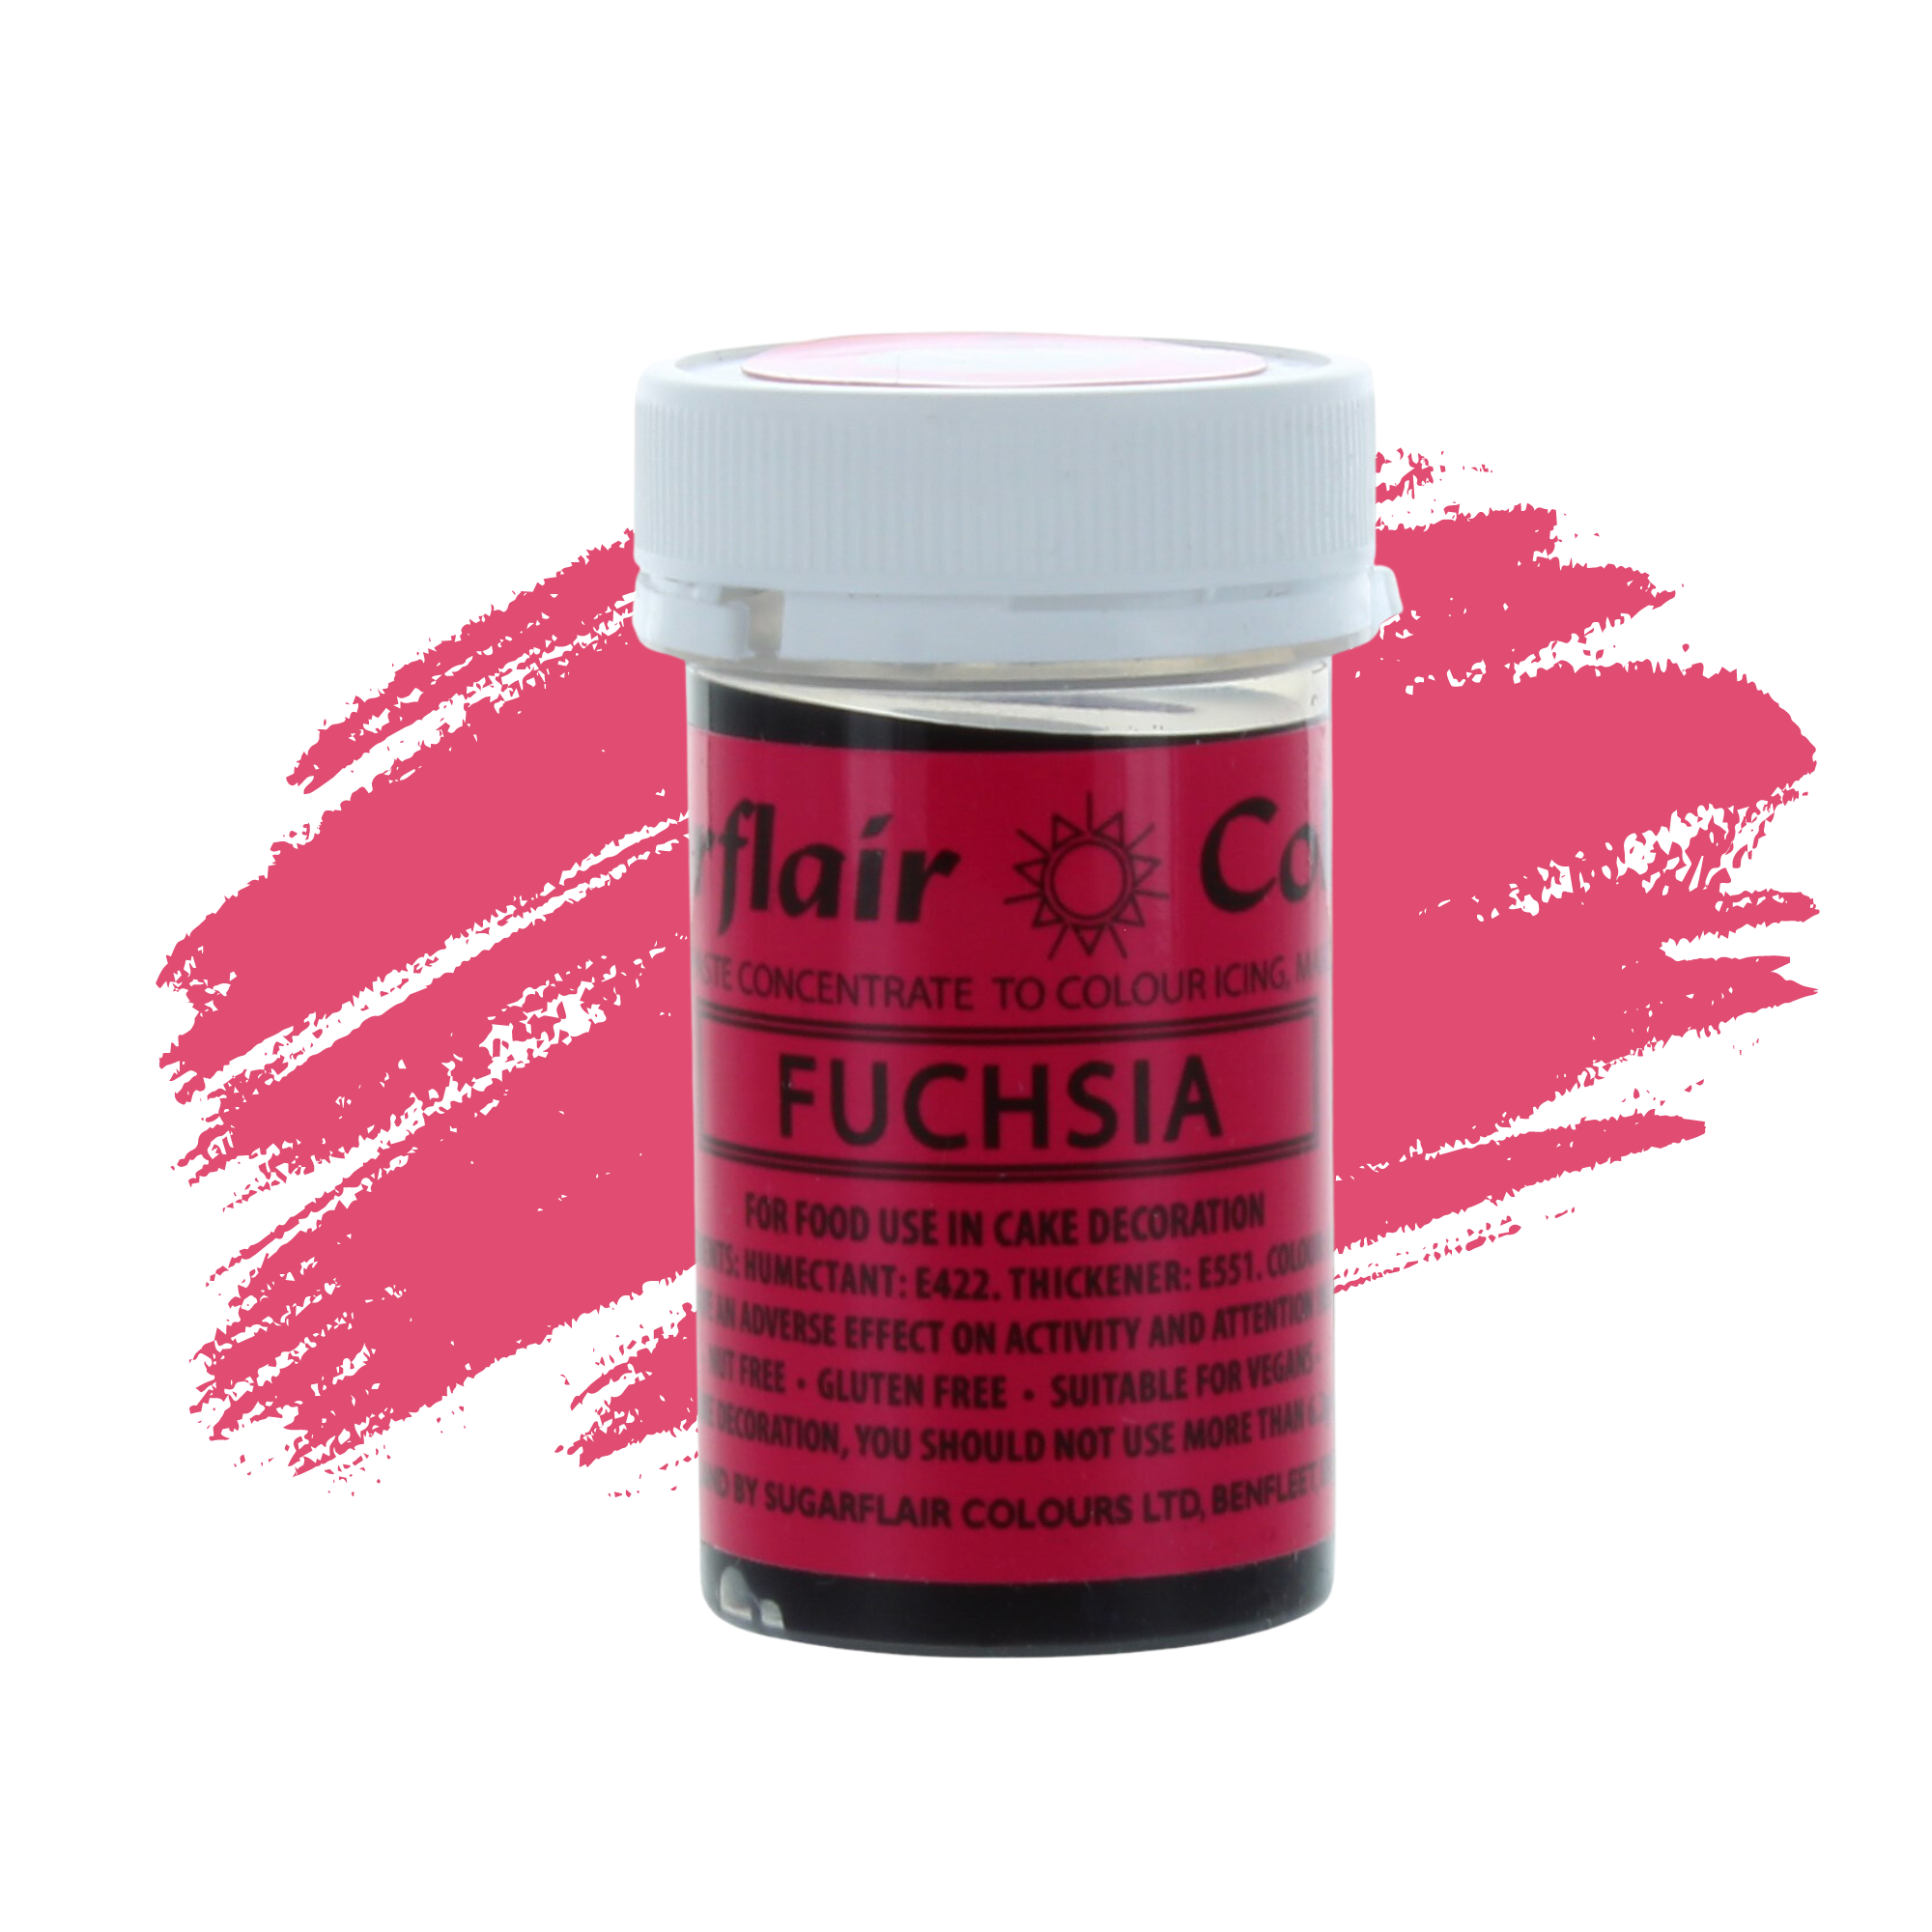 Sugarflair Paste Colours Concentrated Food Colouring - Spectral Fuchsia Pink - 25g